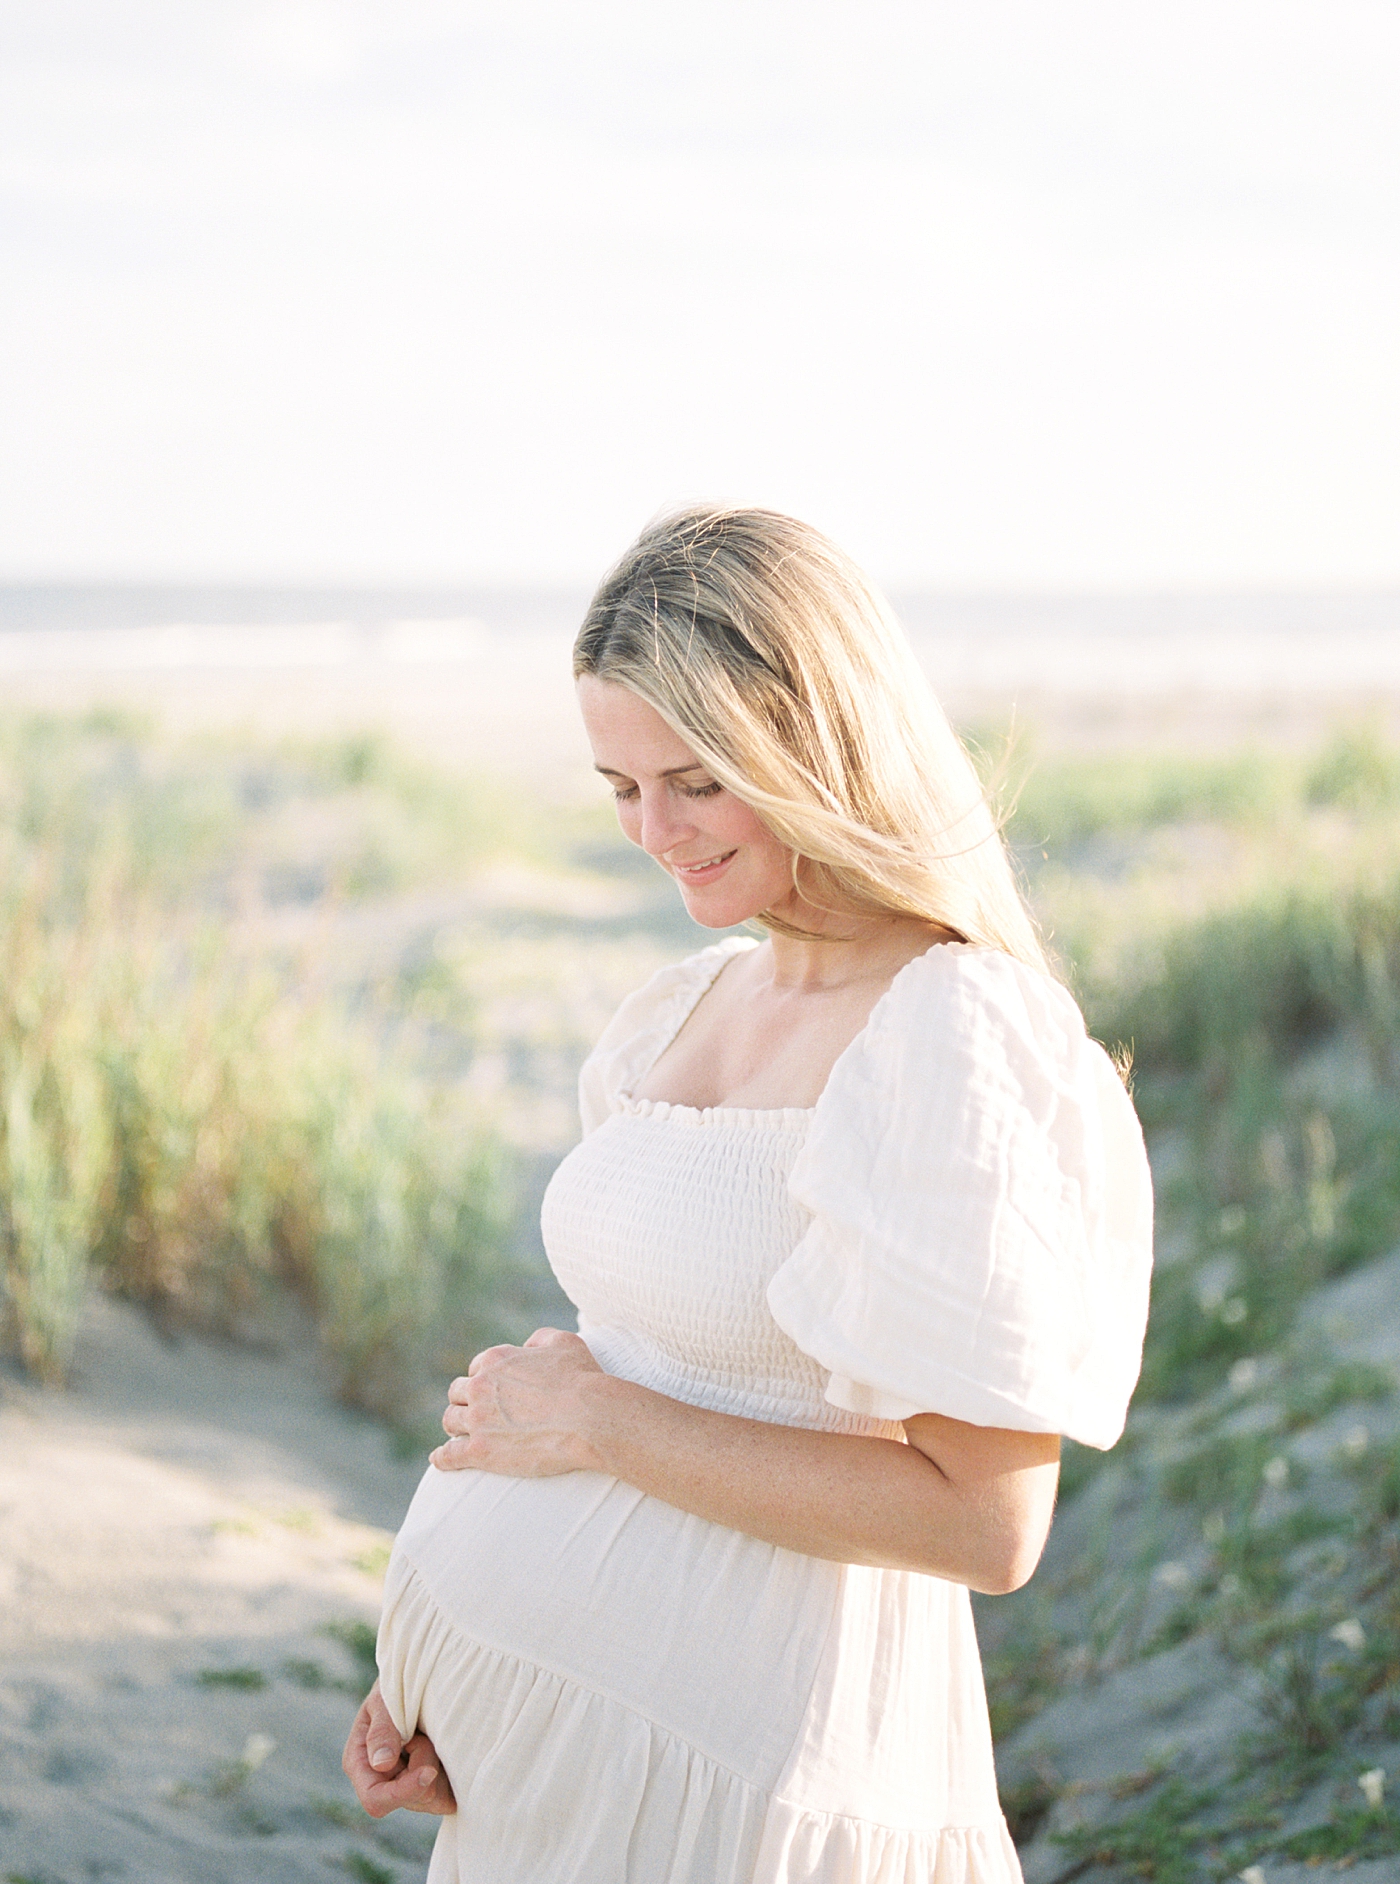 Mom in a flowy white dress with her hand resting on her pregnant belly | Image by Caitlyn Motycka